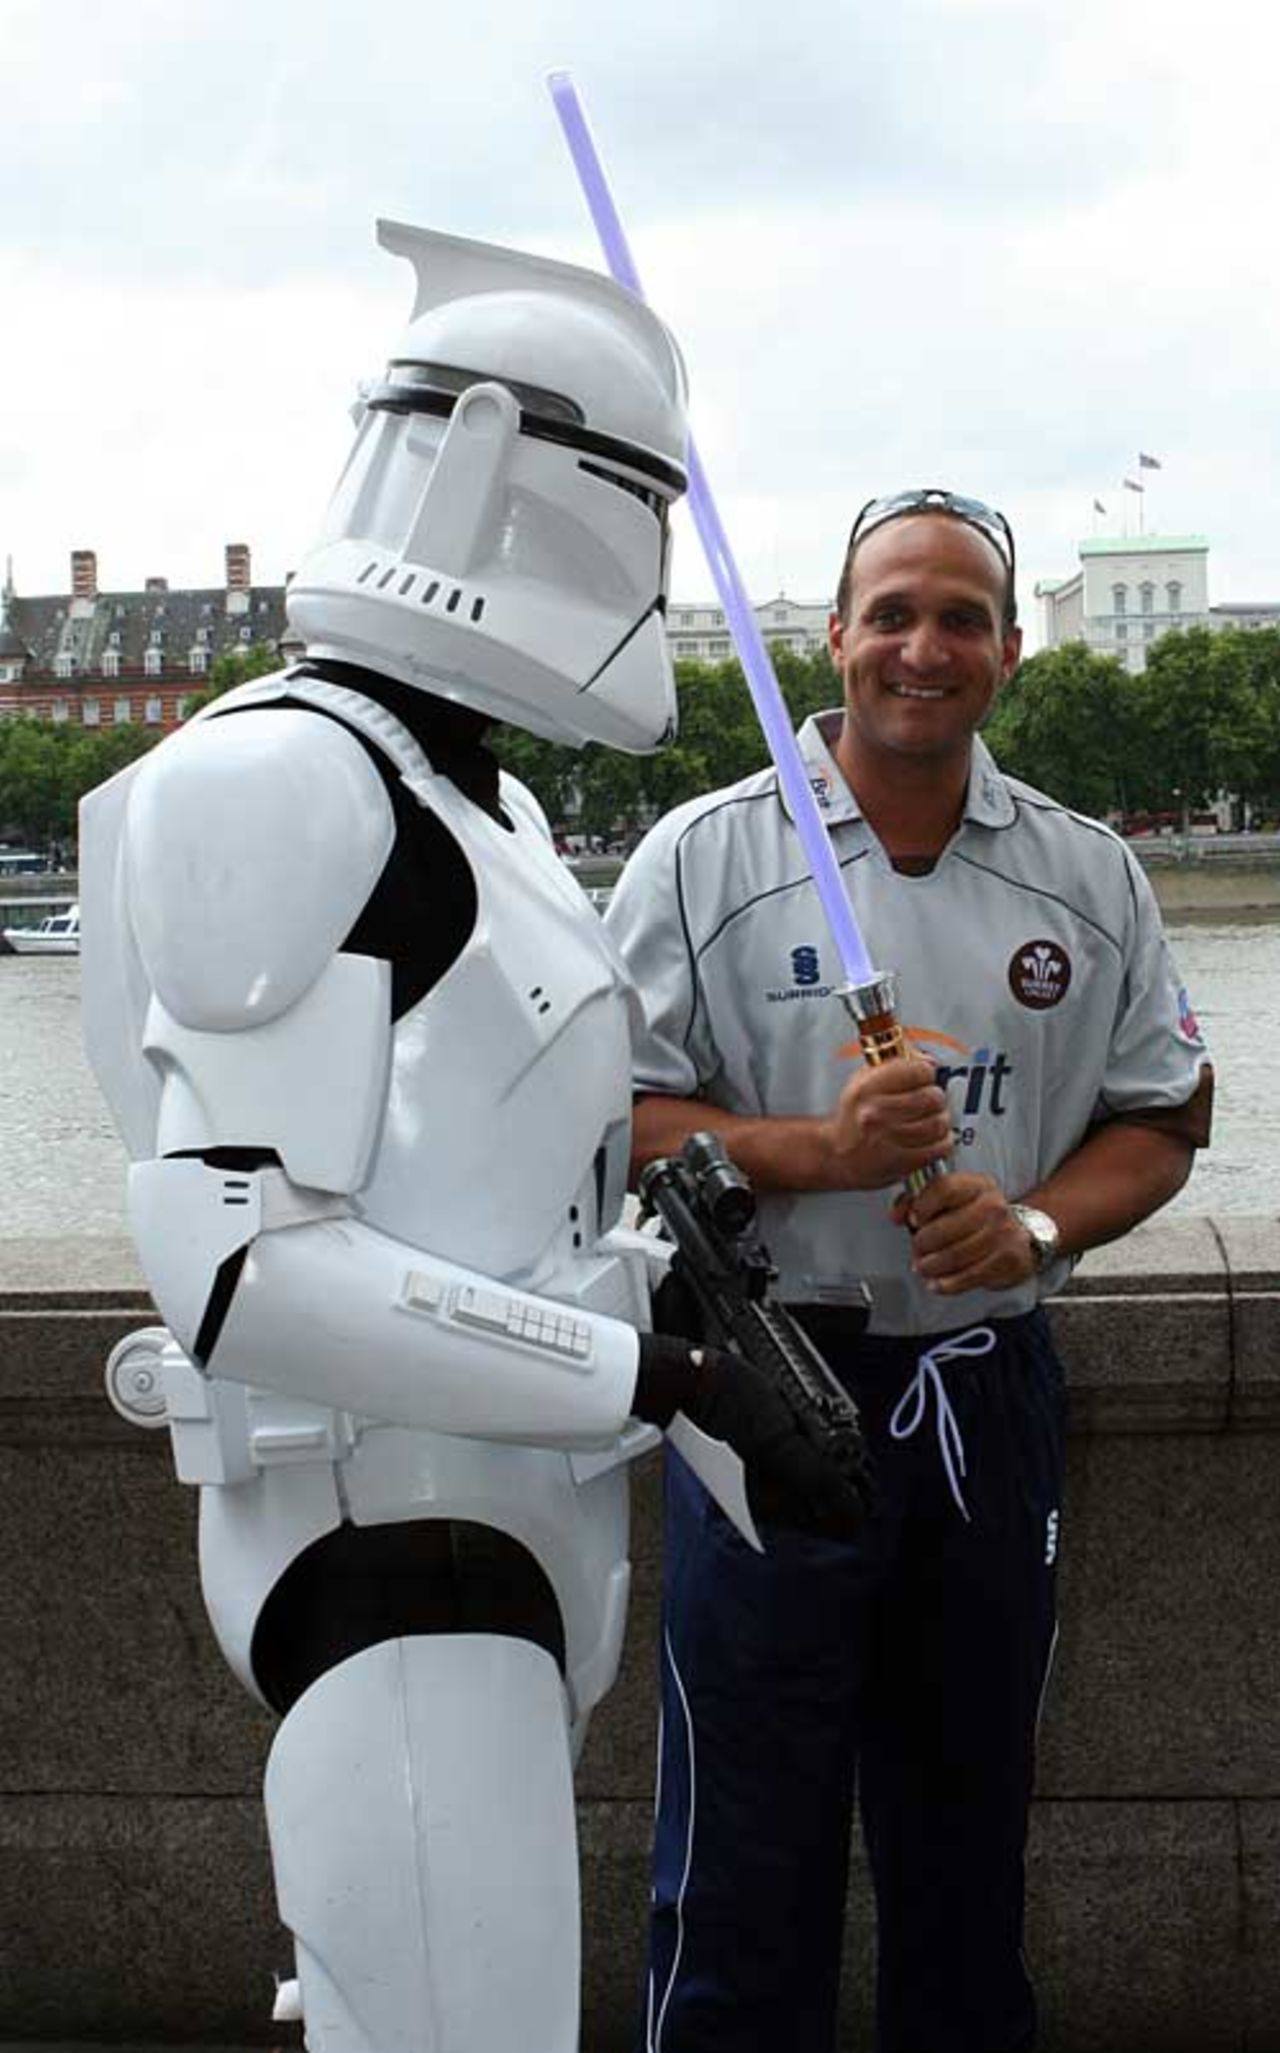 Mark Butcher lives a childhood dream with a Stars Wars moment, London, June 21, 2007